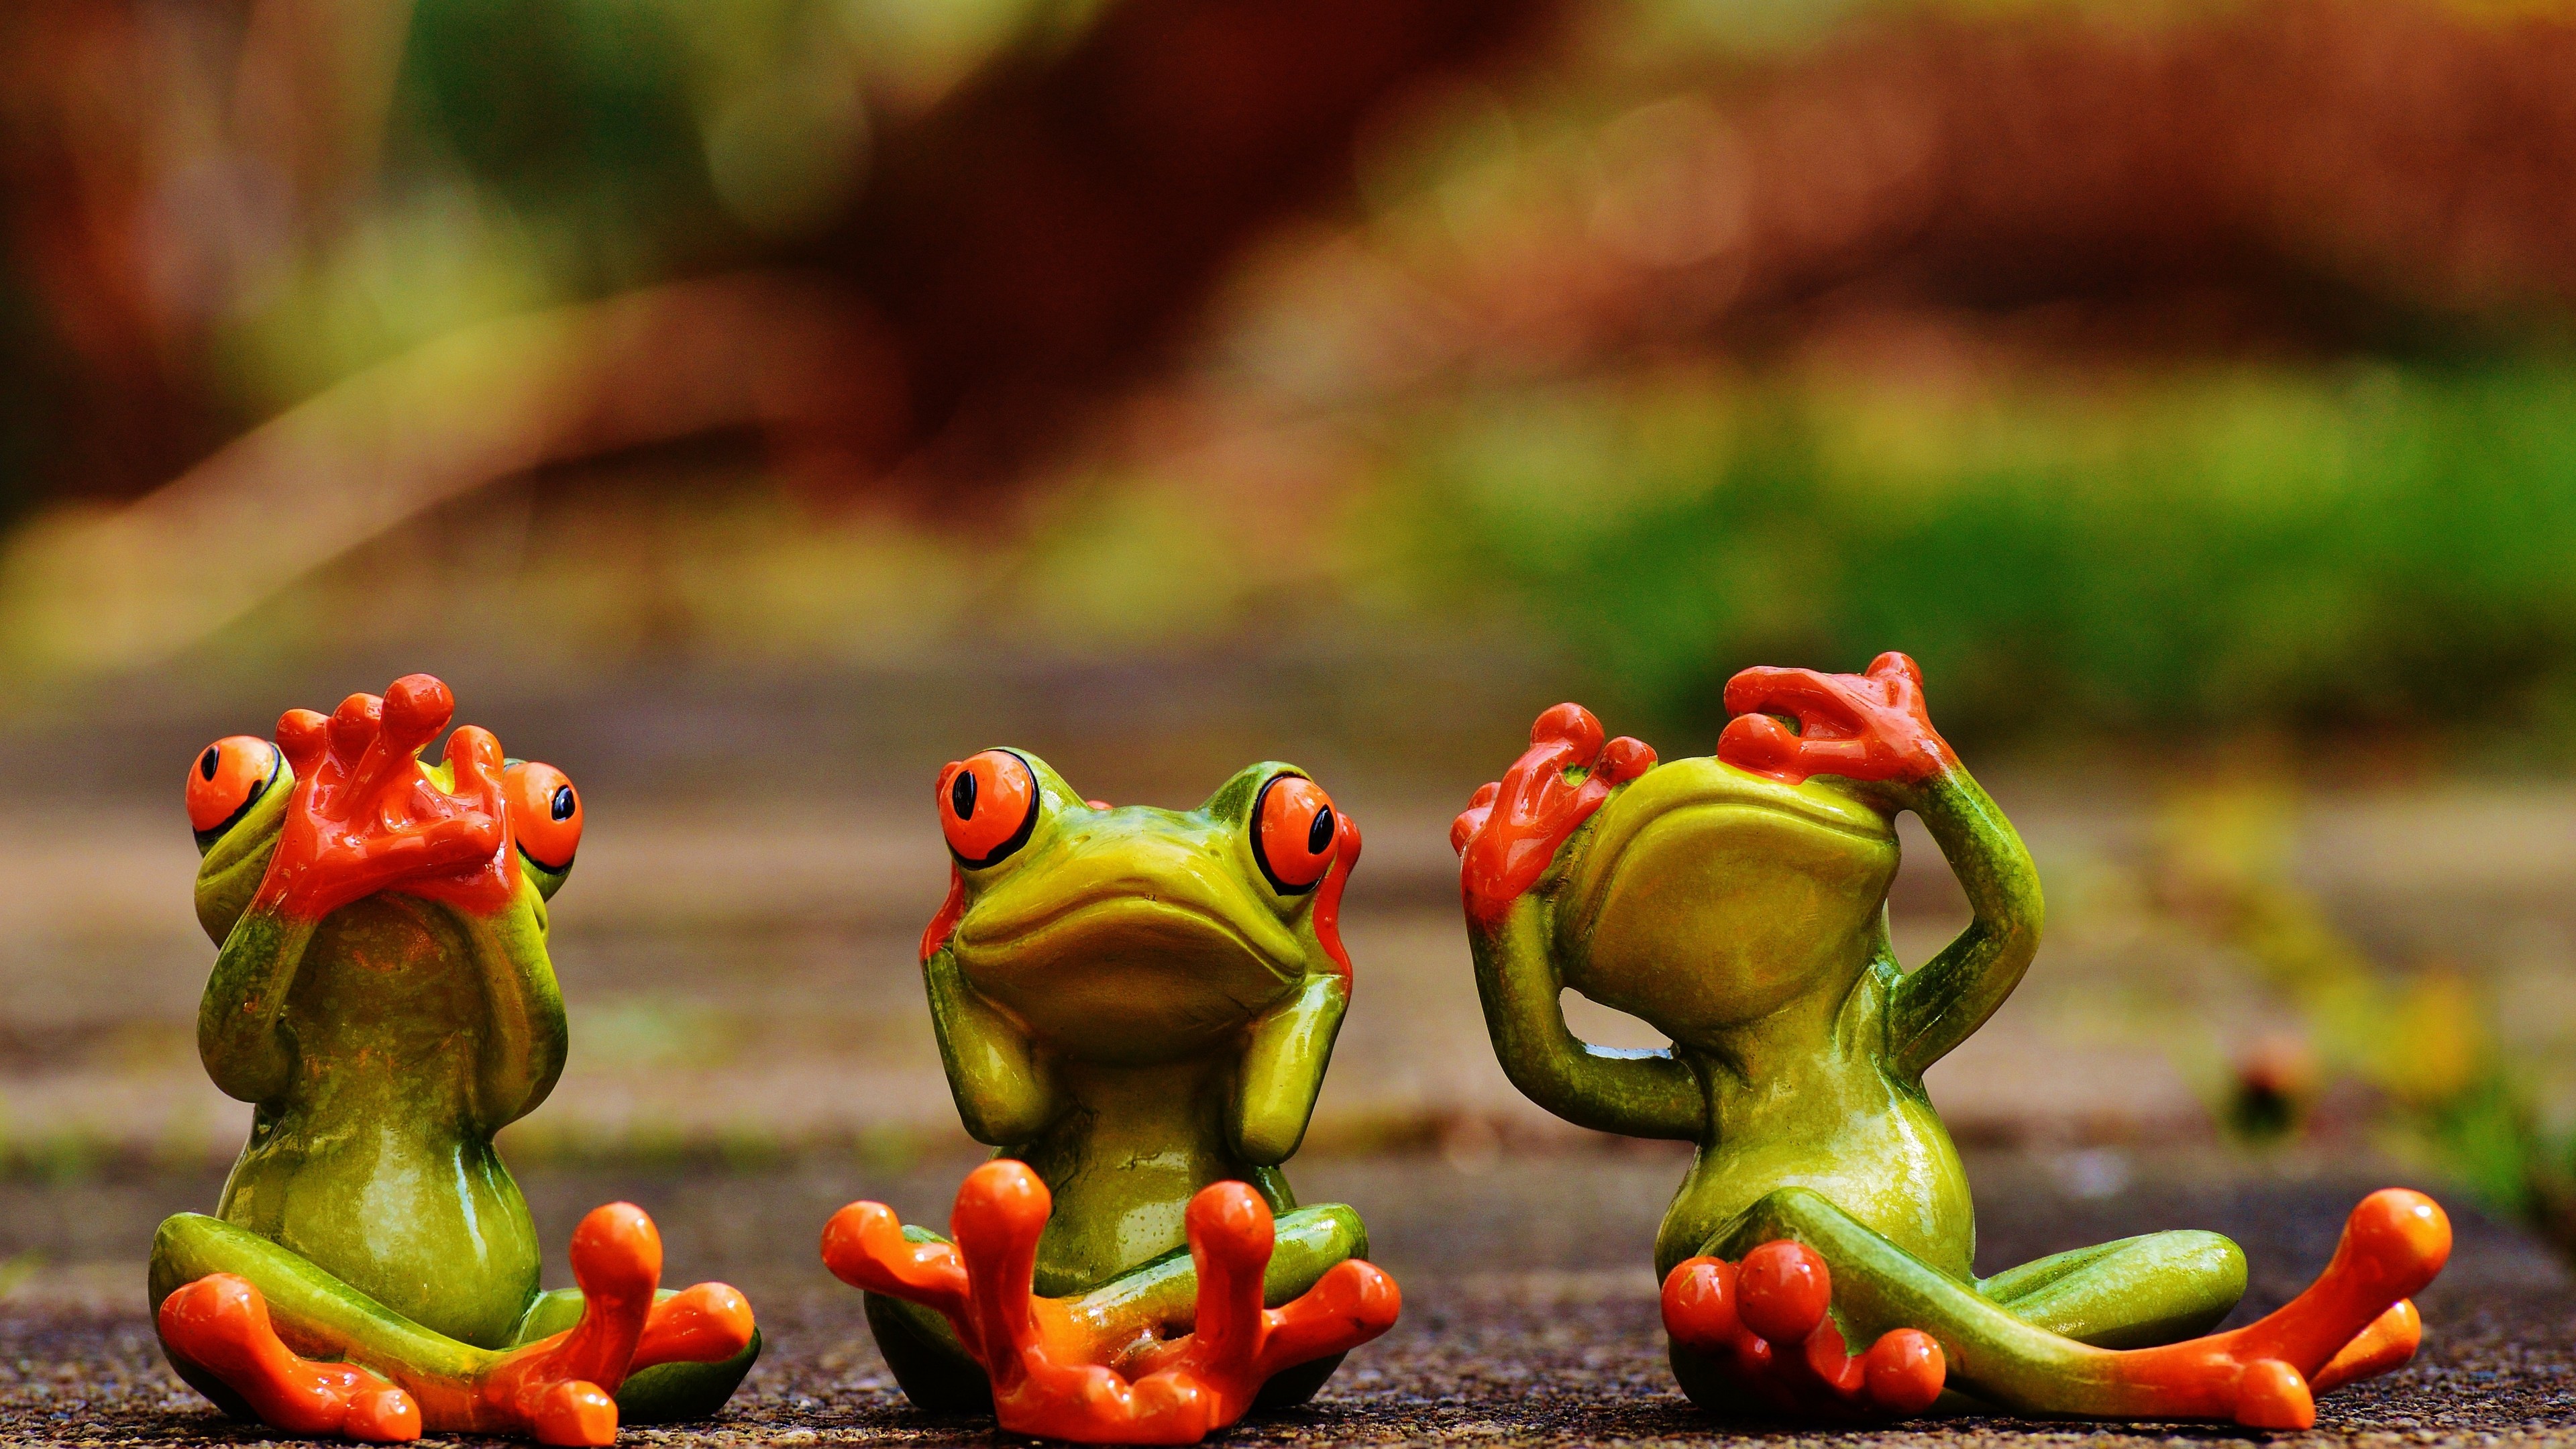 Cute Green Frogs With Red Eyes 3 D Wallpaper Hd 3840x2160